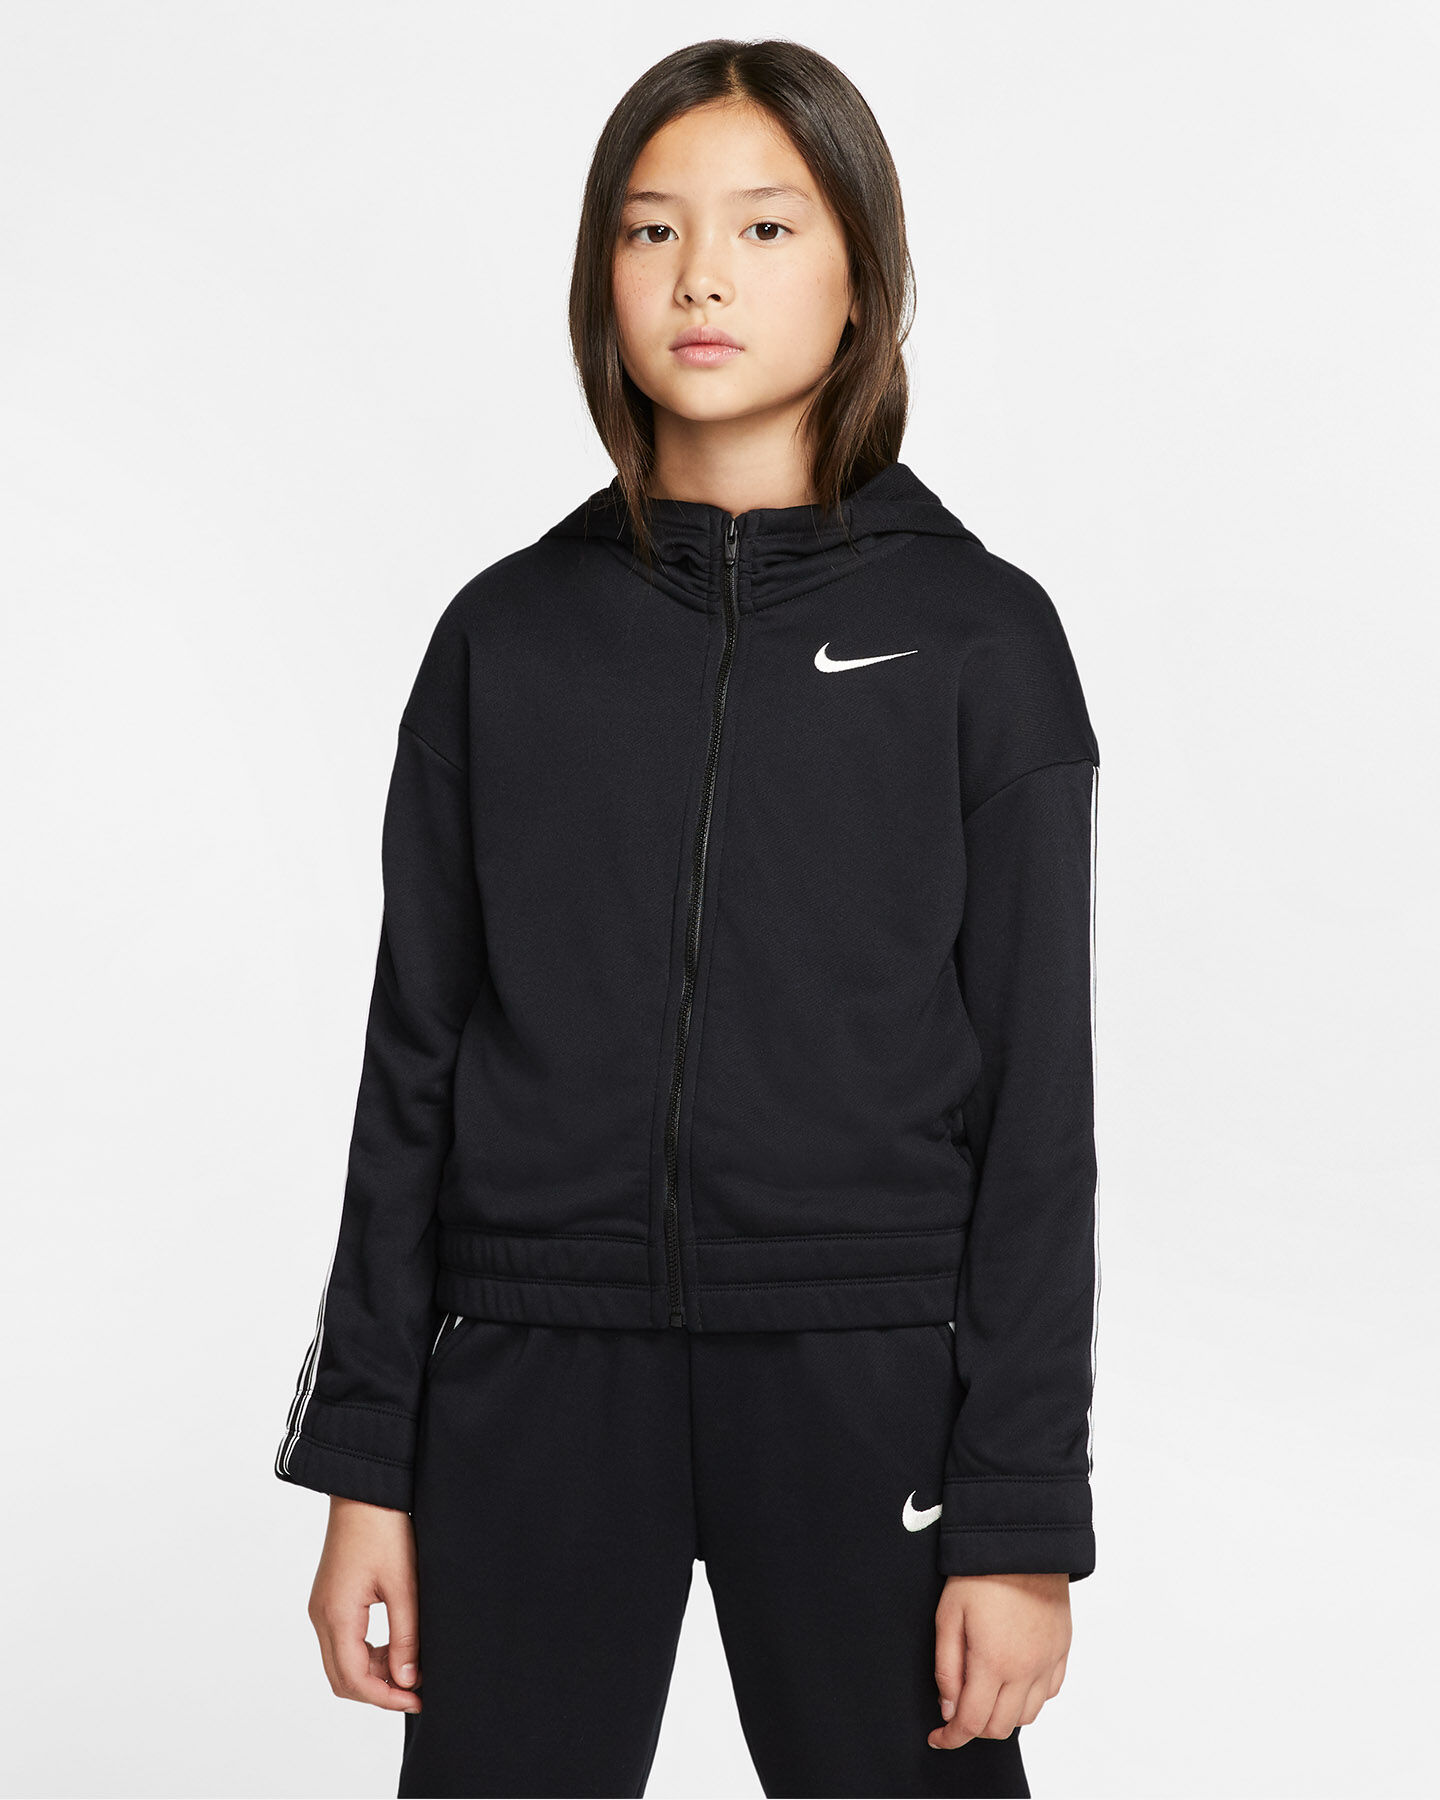  Felpa NIKE YOUNG ATHLETES JR S5073170|010|S scatto 2